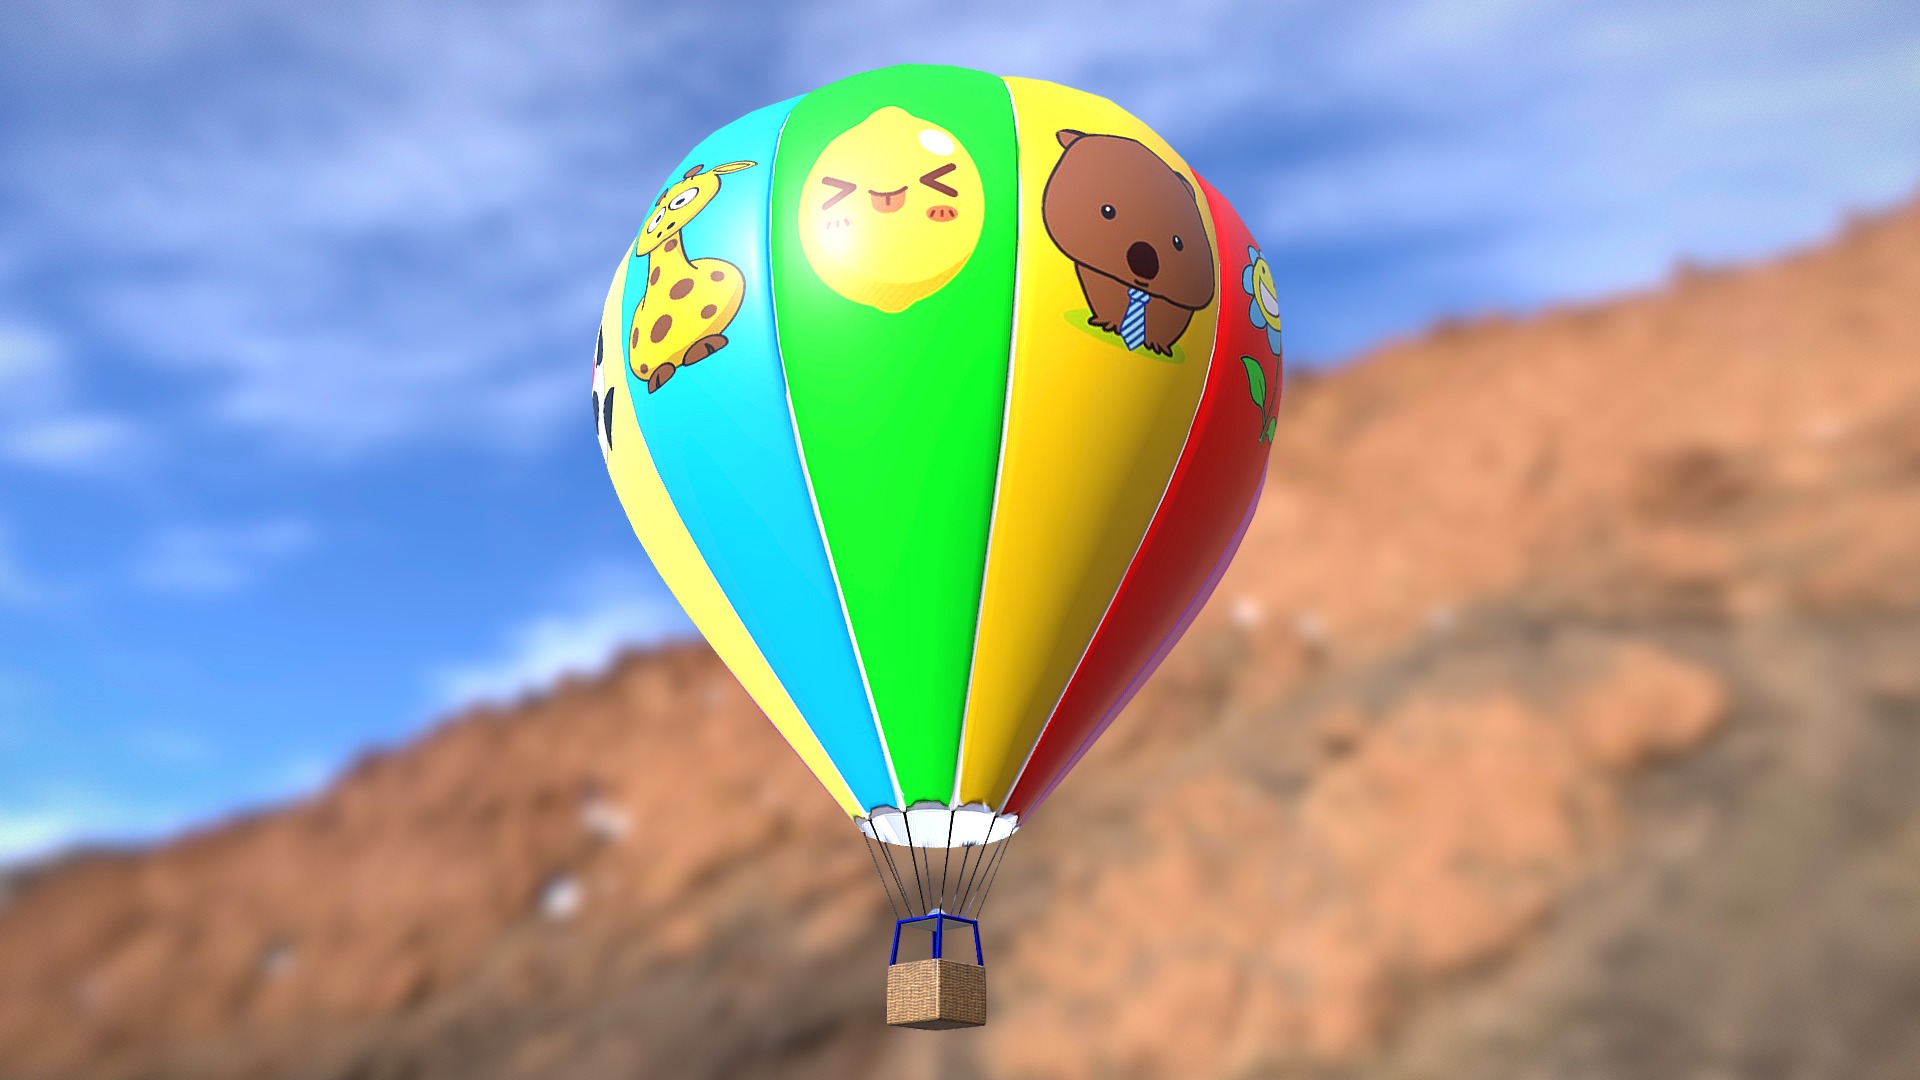 3D model low poly hot air balloon - This is a 3D model of the low poly hot air balloon. The 3D model is about a hot air balloon in the air.